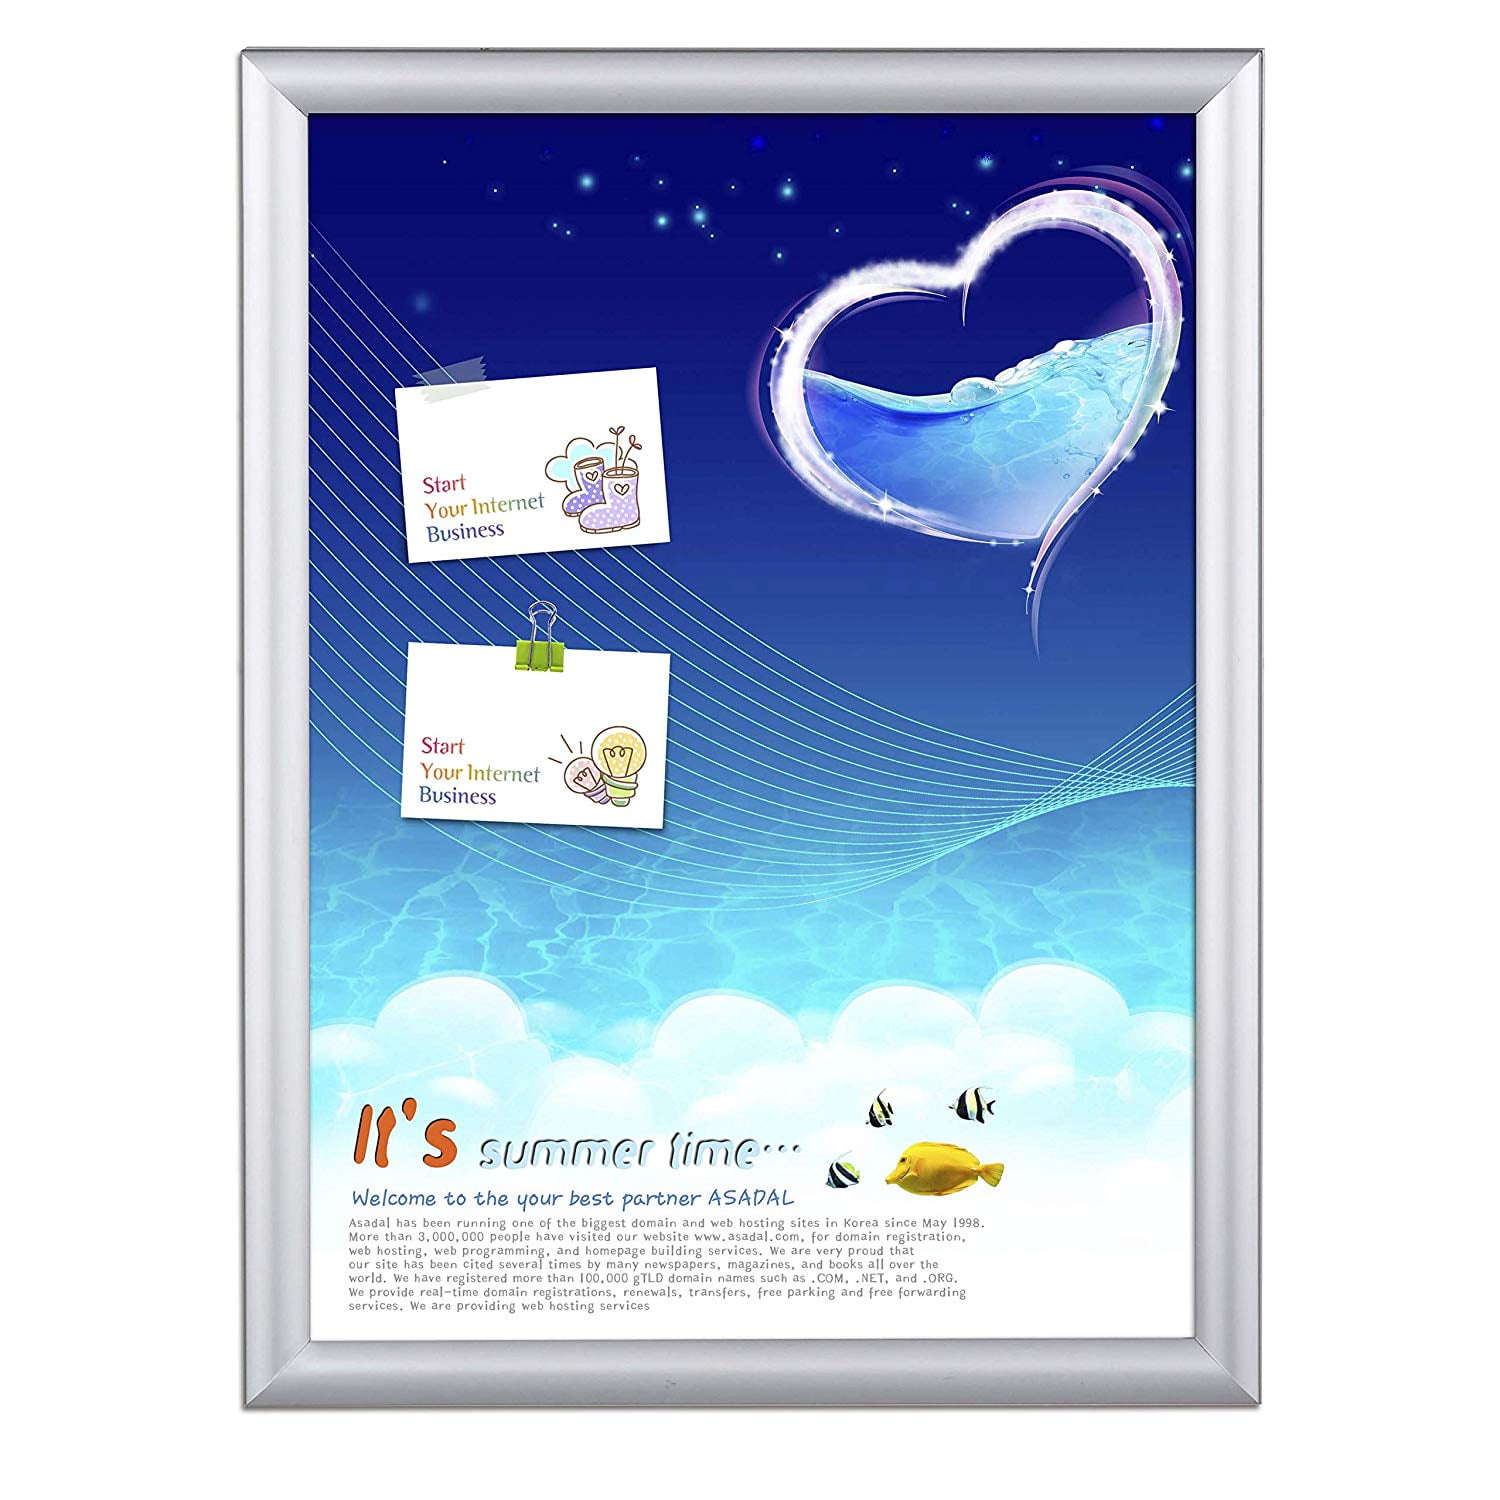 M&T Displays Security Snap Frame Poster Size 1 Silver Color Profile Mitered Corner Front Loading 18x24 